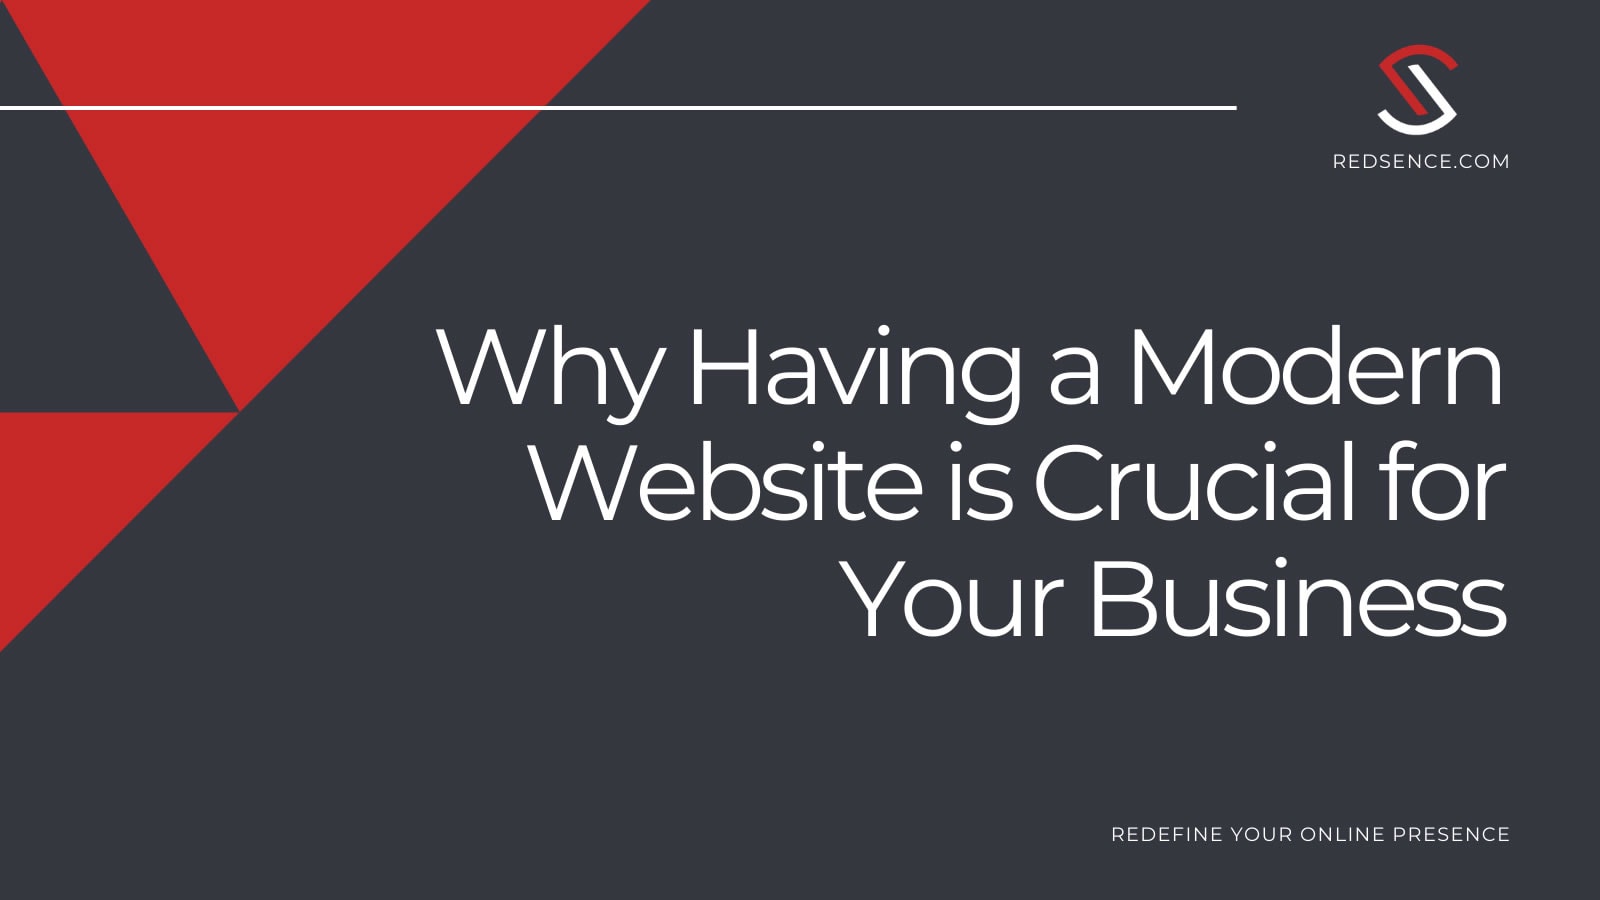 Why Having a Modern Website is Crucial for Your Business